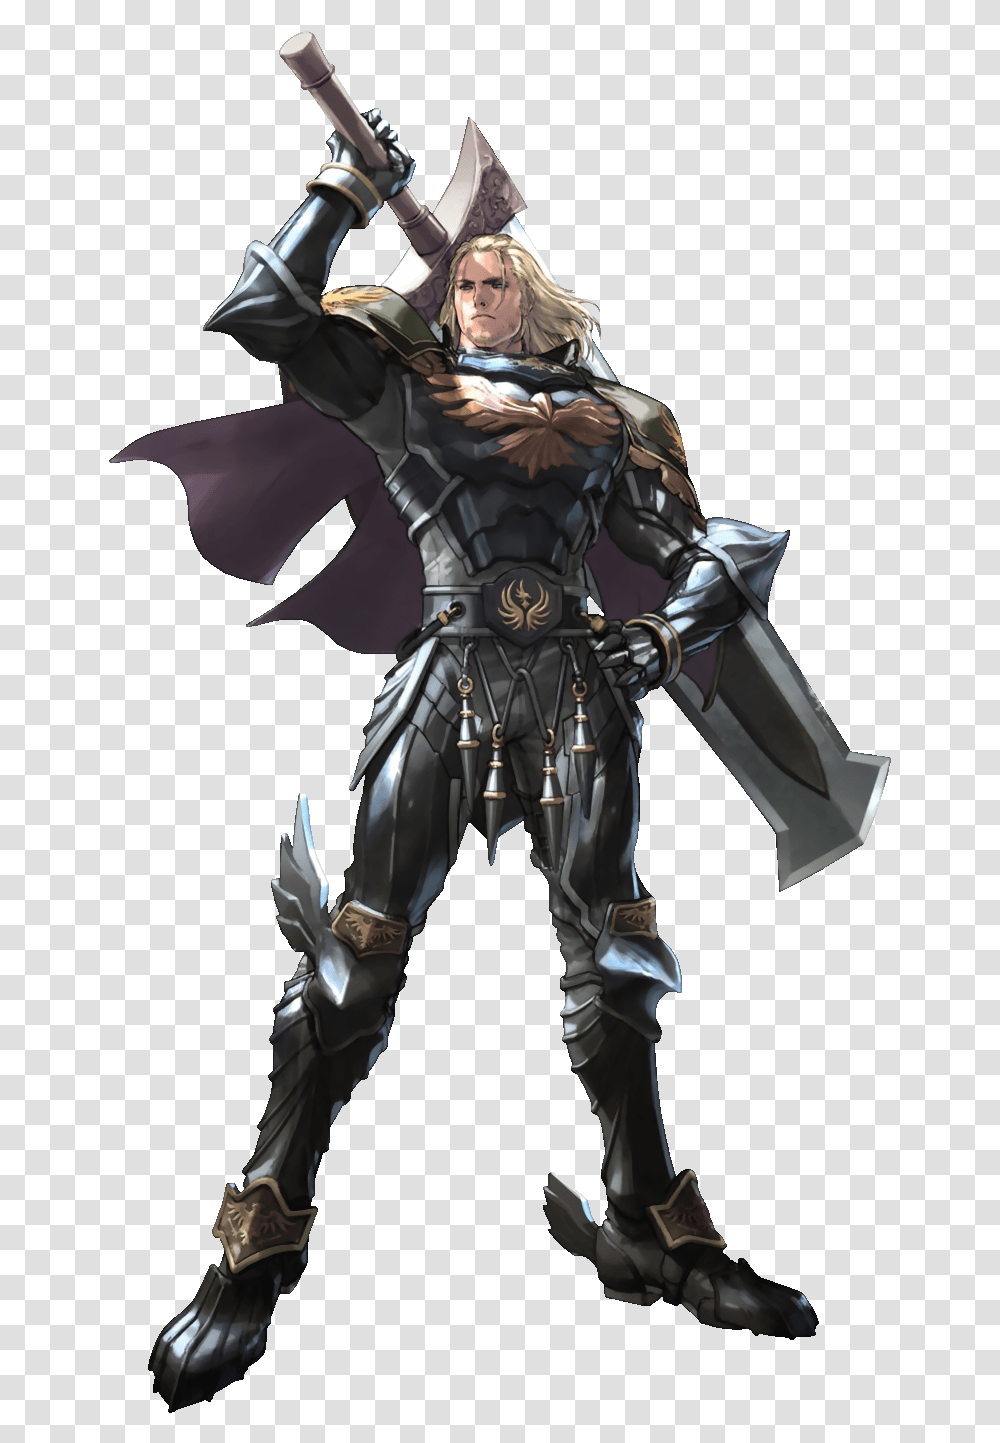 Siegfried Schtauffen As He Appears In Soul Calibur Siegfried Soul Calibur V, Person, Human, Knight, Armor Transparent Png